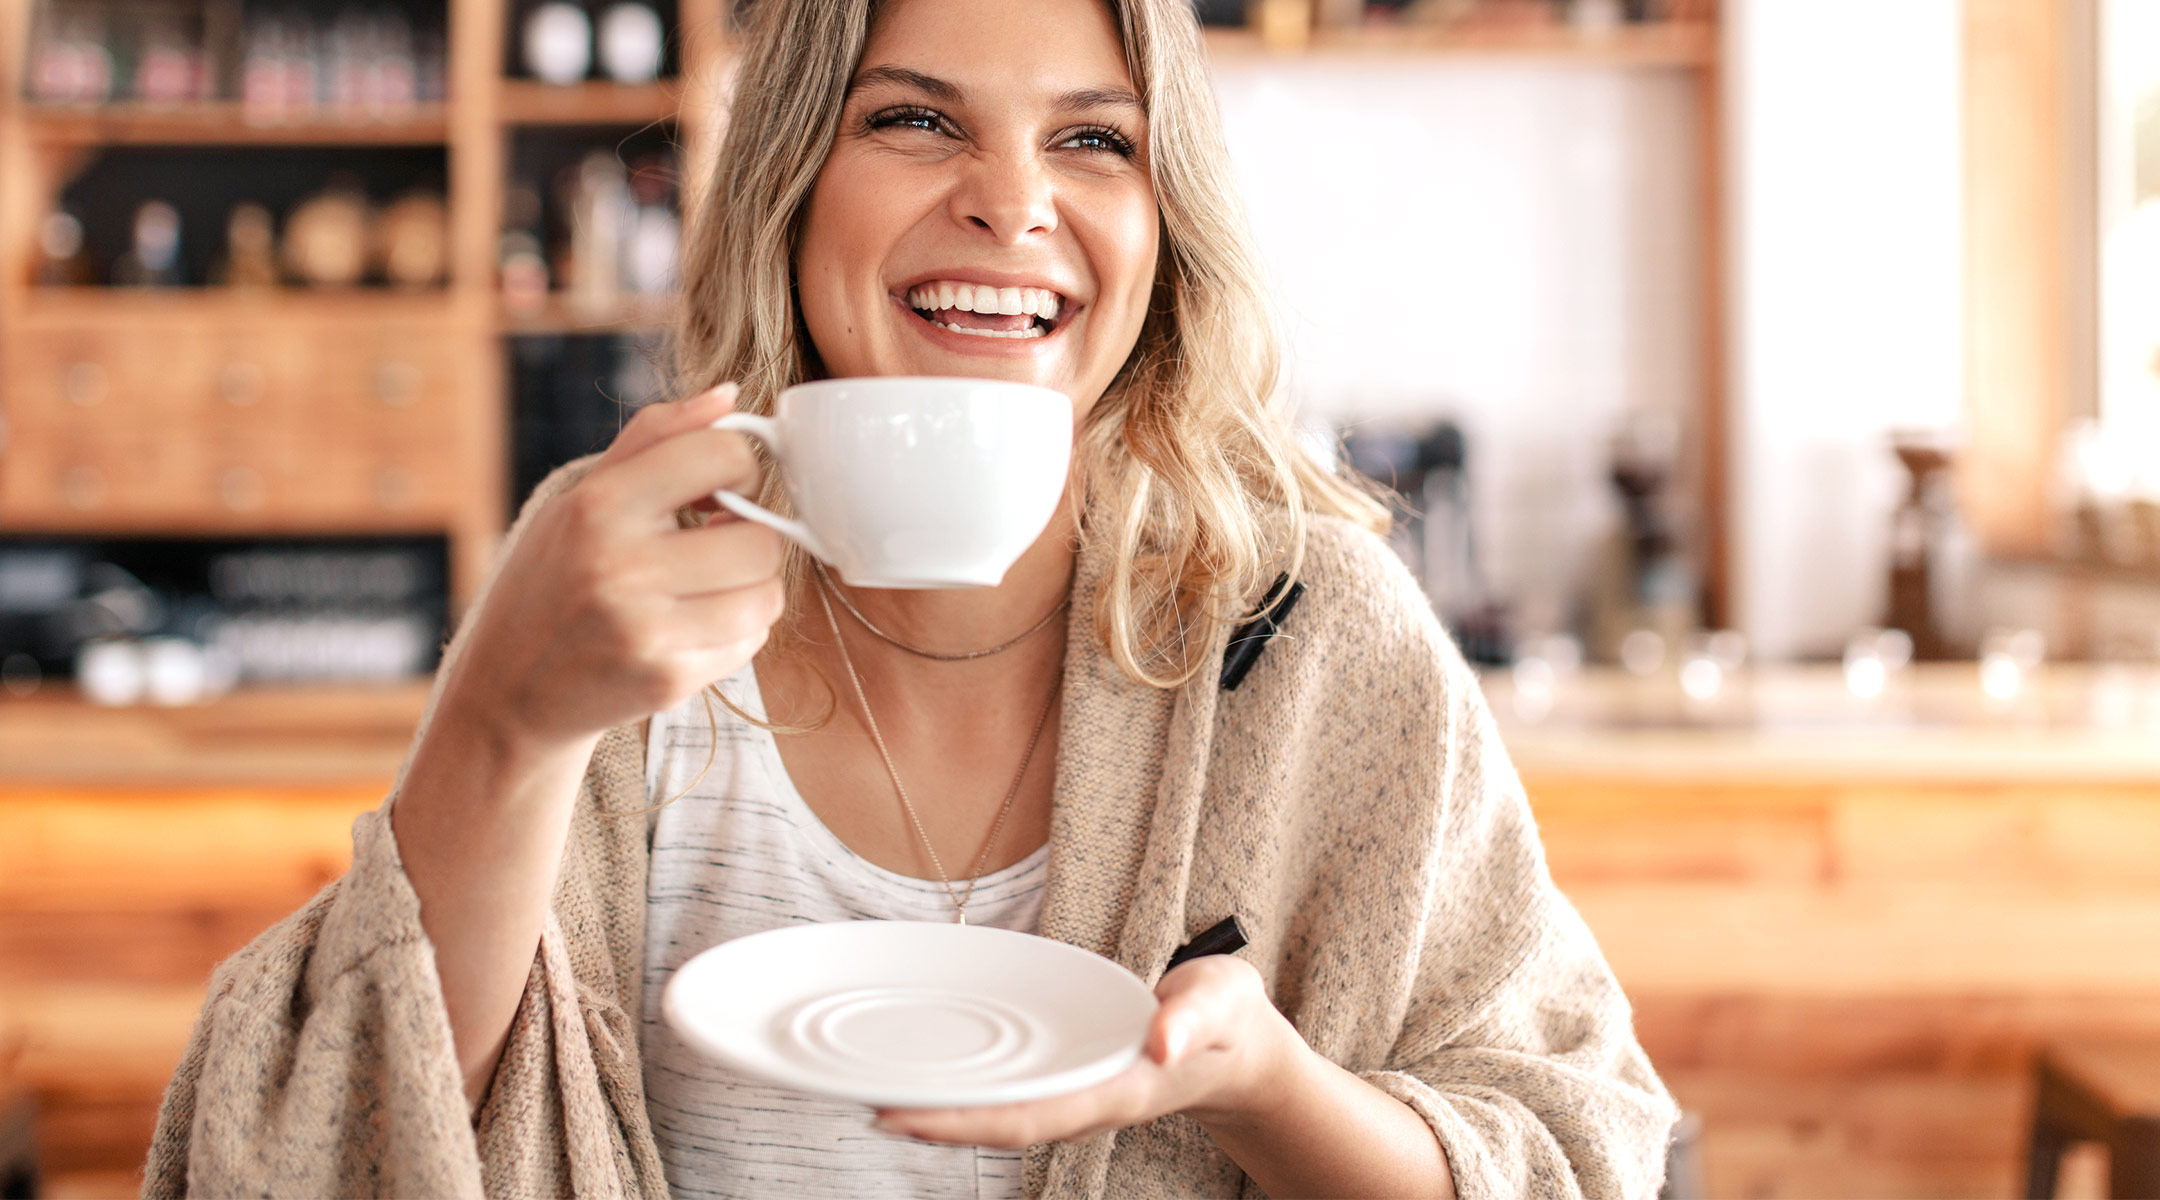 woman laughing and drinking coffee in cafe